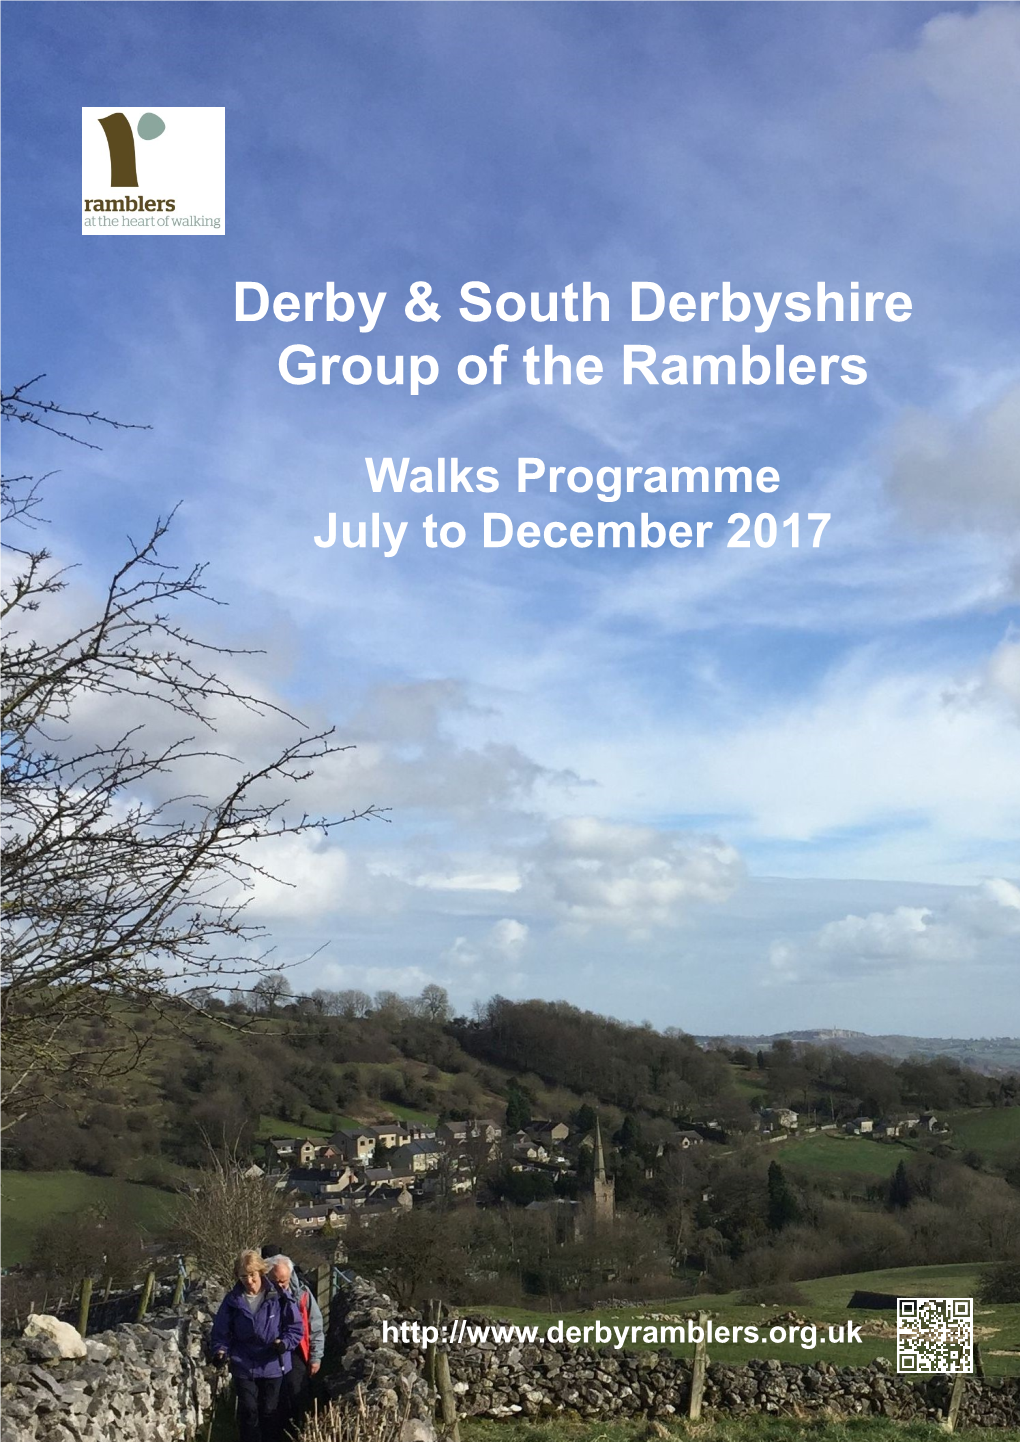 Derby & South Derbyshire Group of the Ramblers